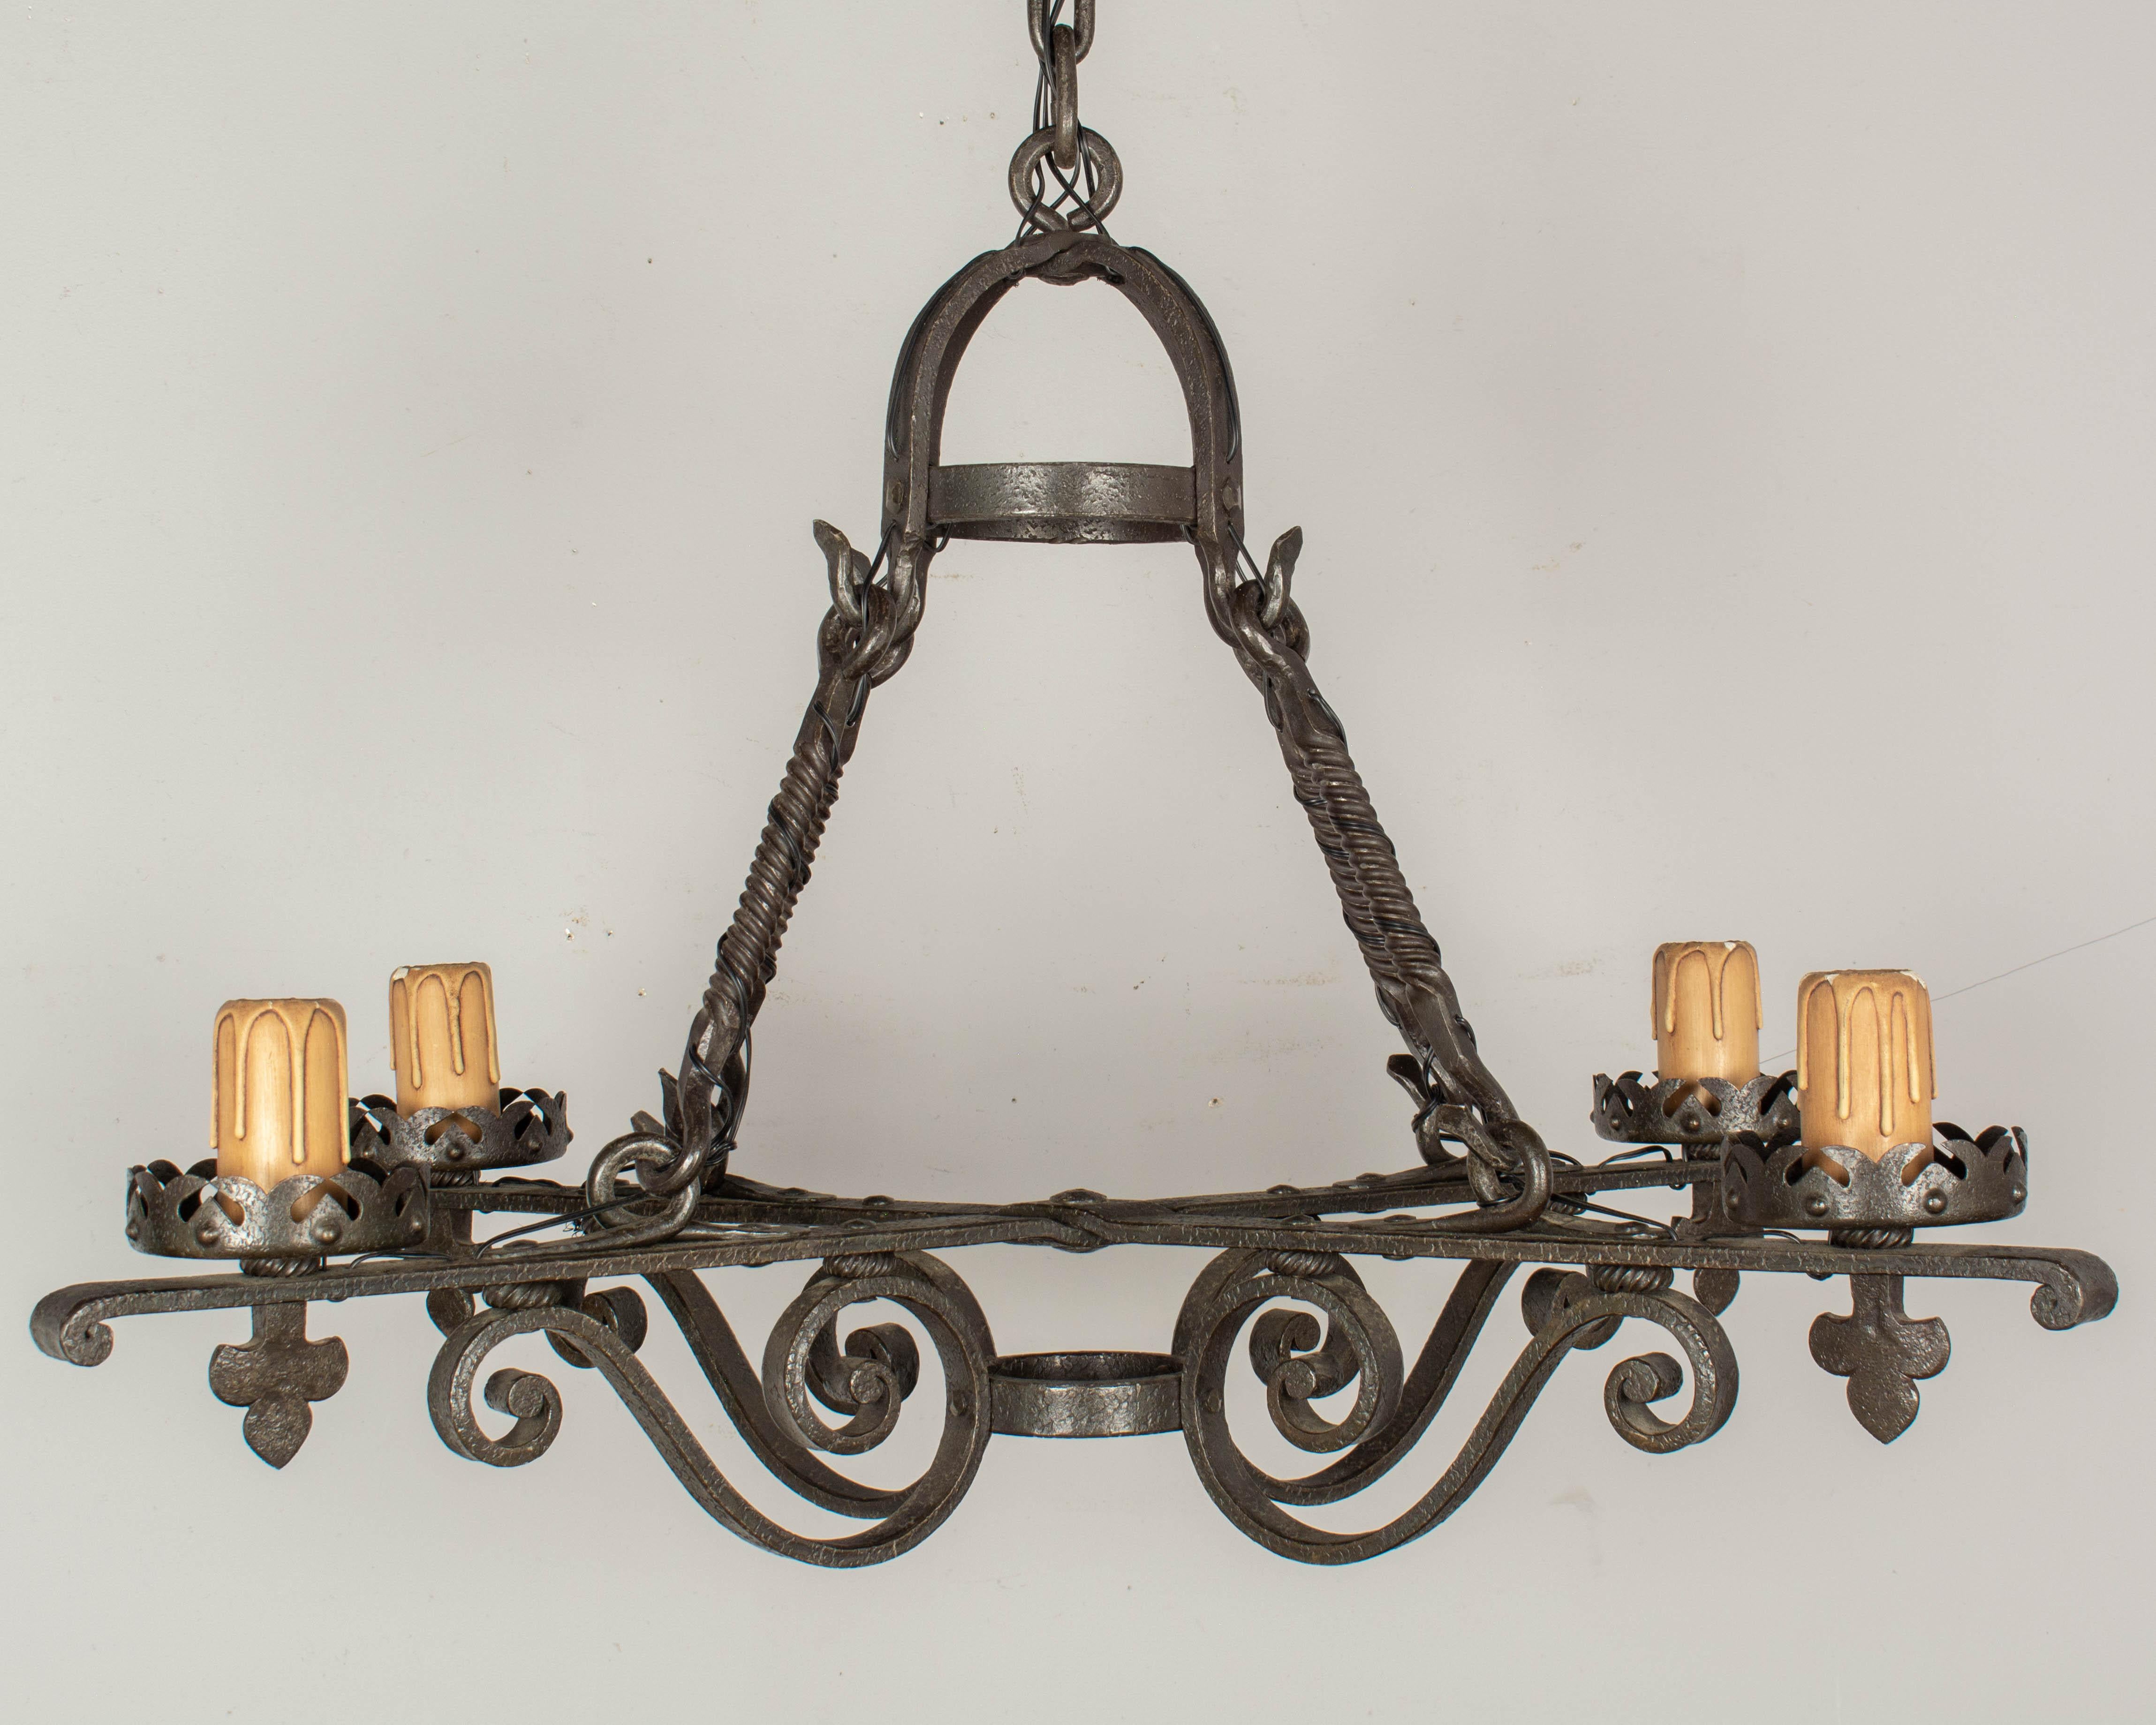 French Art Deco Wrought Iron Chandelier In Good Condition For Sale In Winter Park, FL